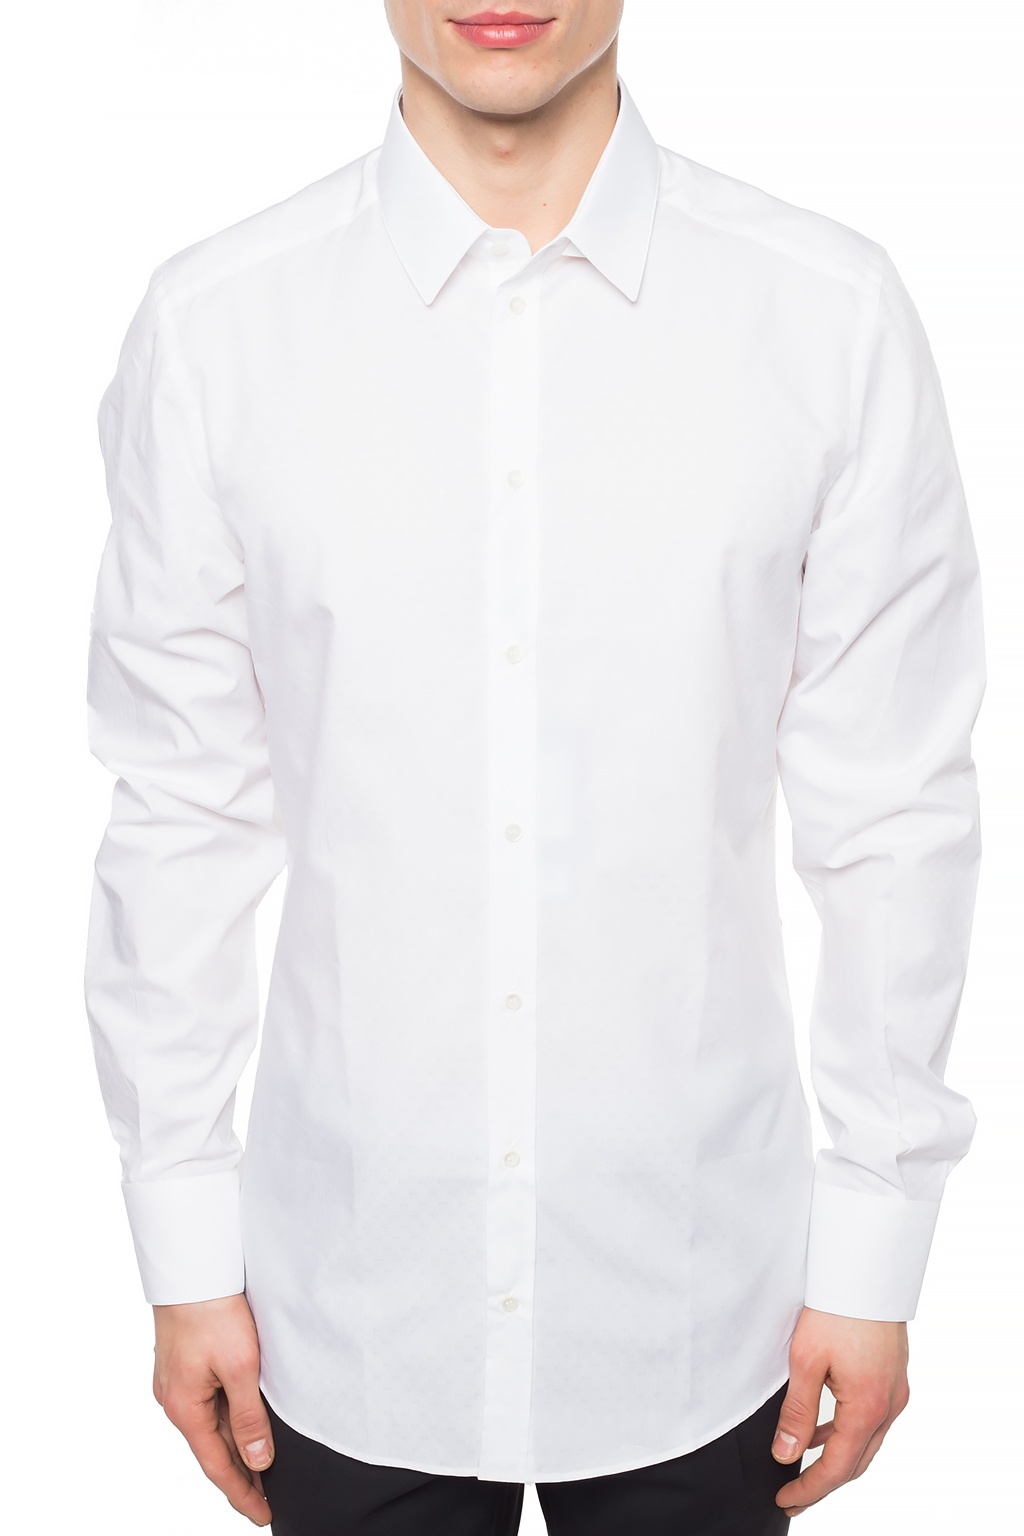 Dolce & Gabbana The One 30ml Embroidered shirt